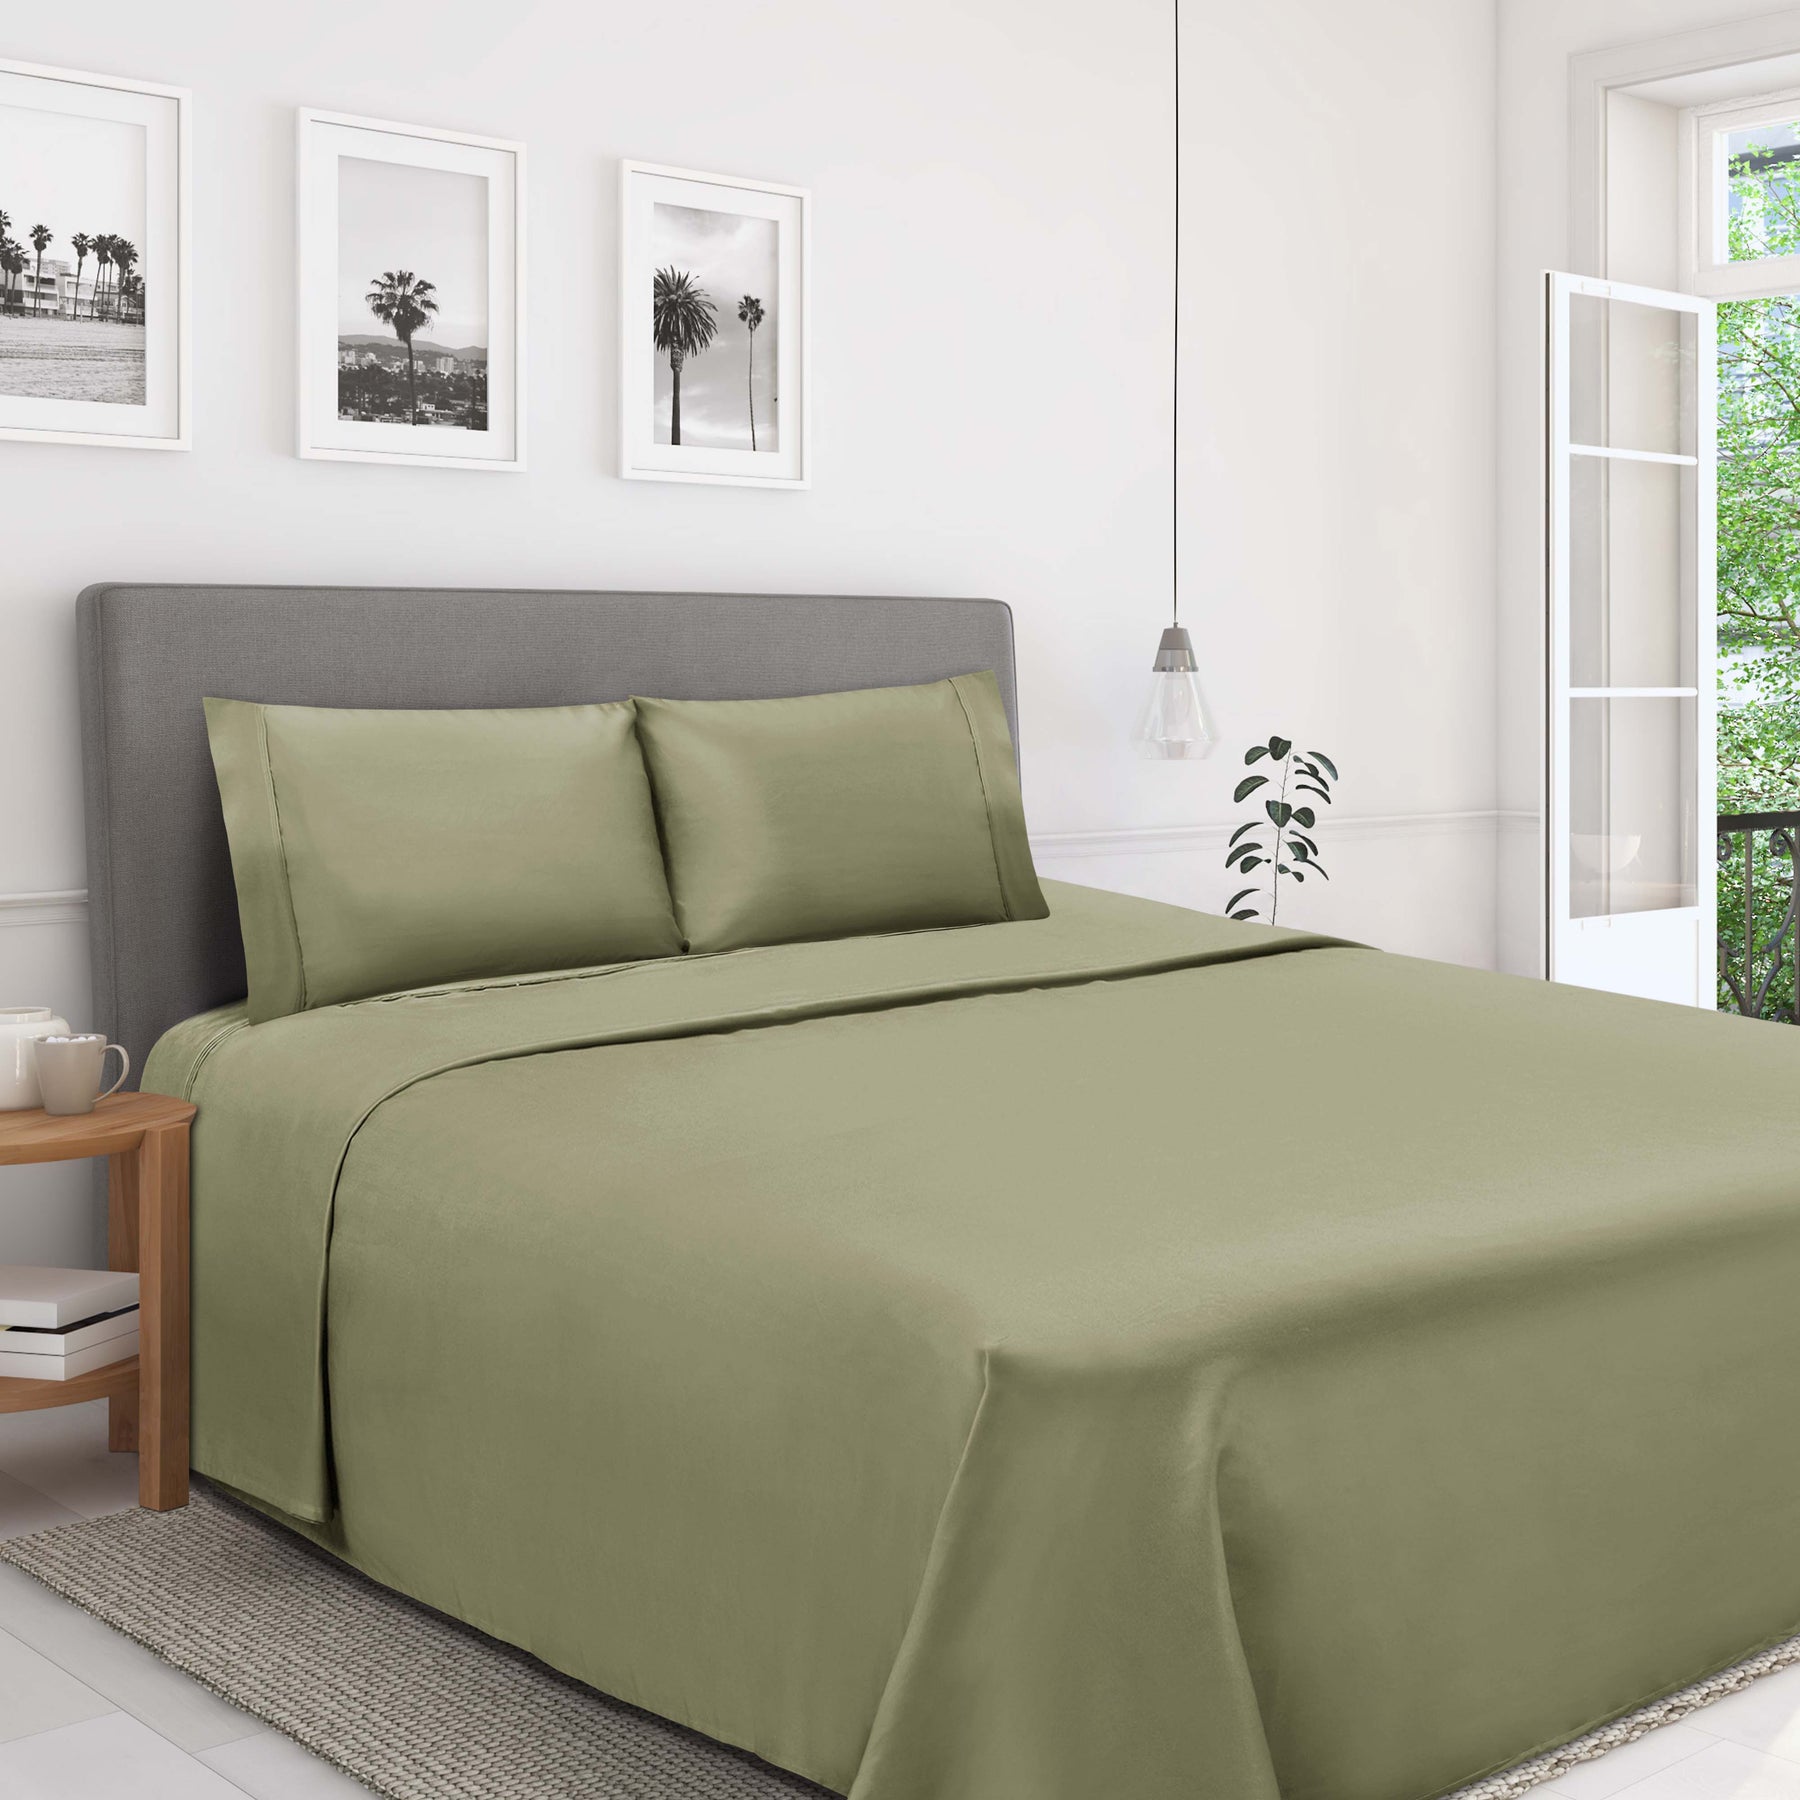 Egyptian Cotton 1200 Thread Count Eco-Friendly Solid Sheet Set - Sage